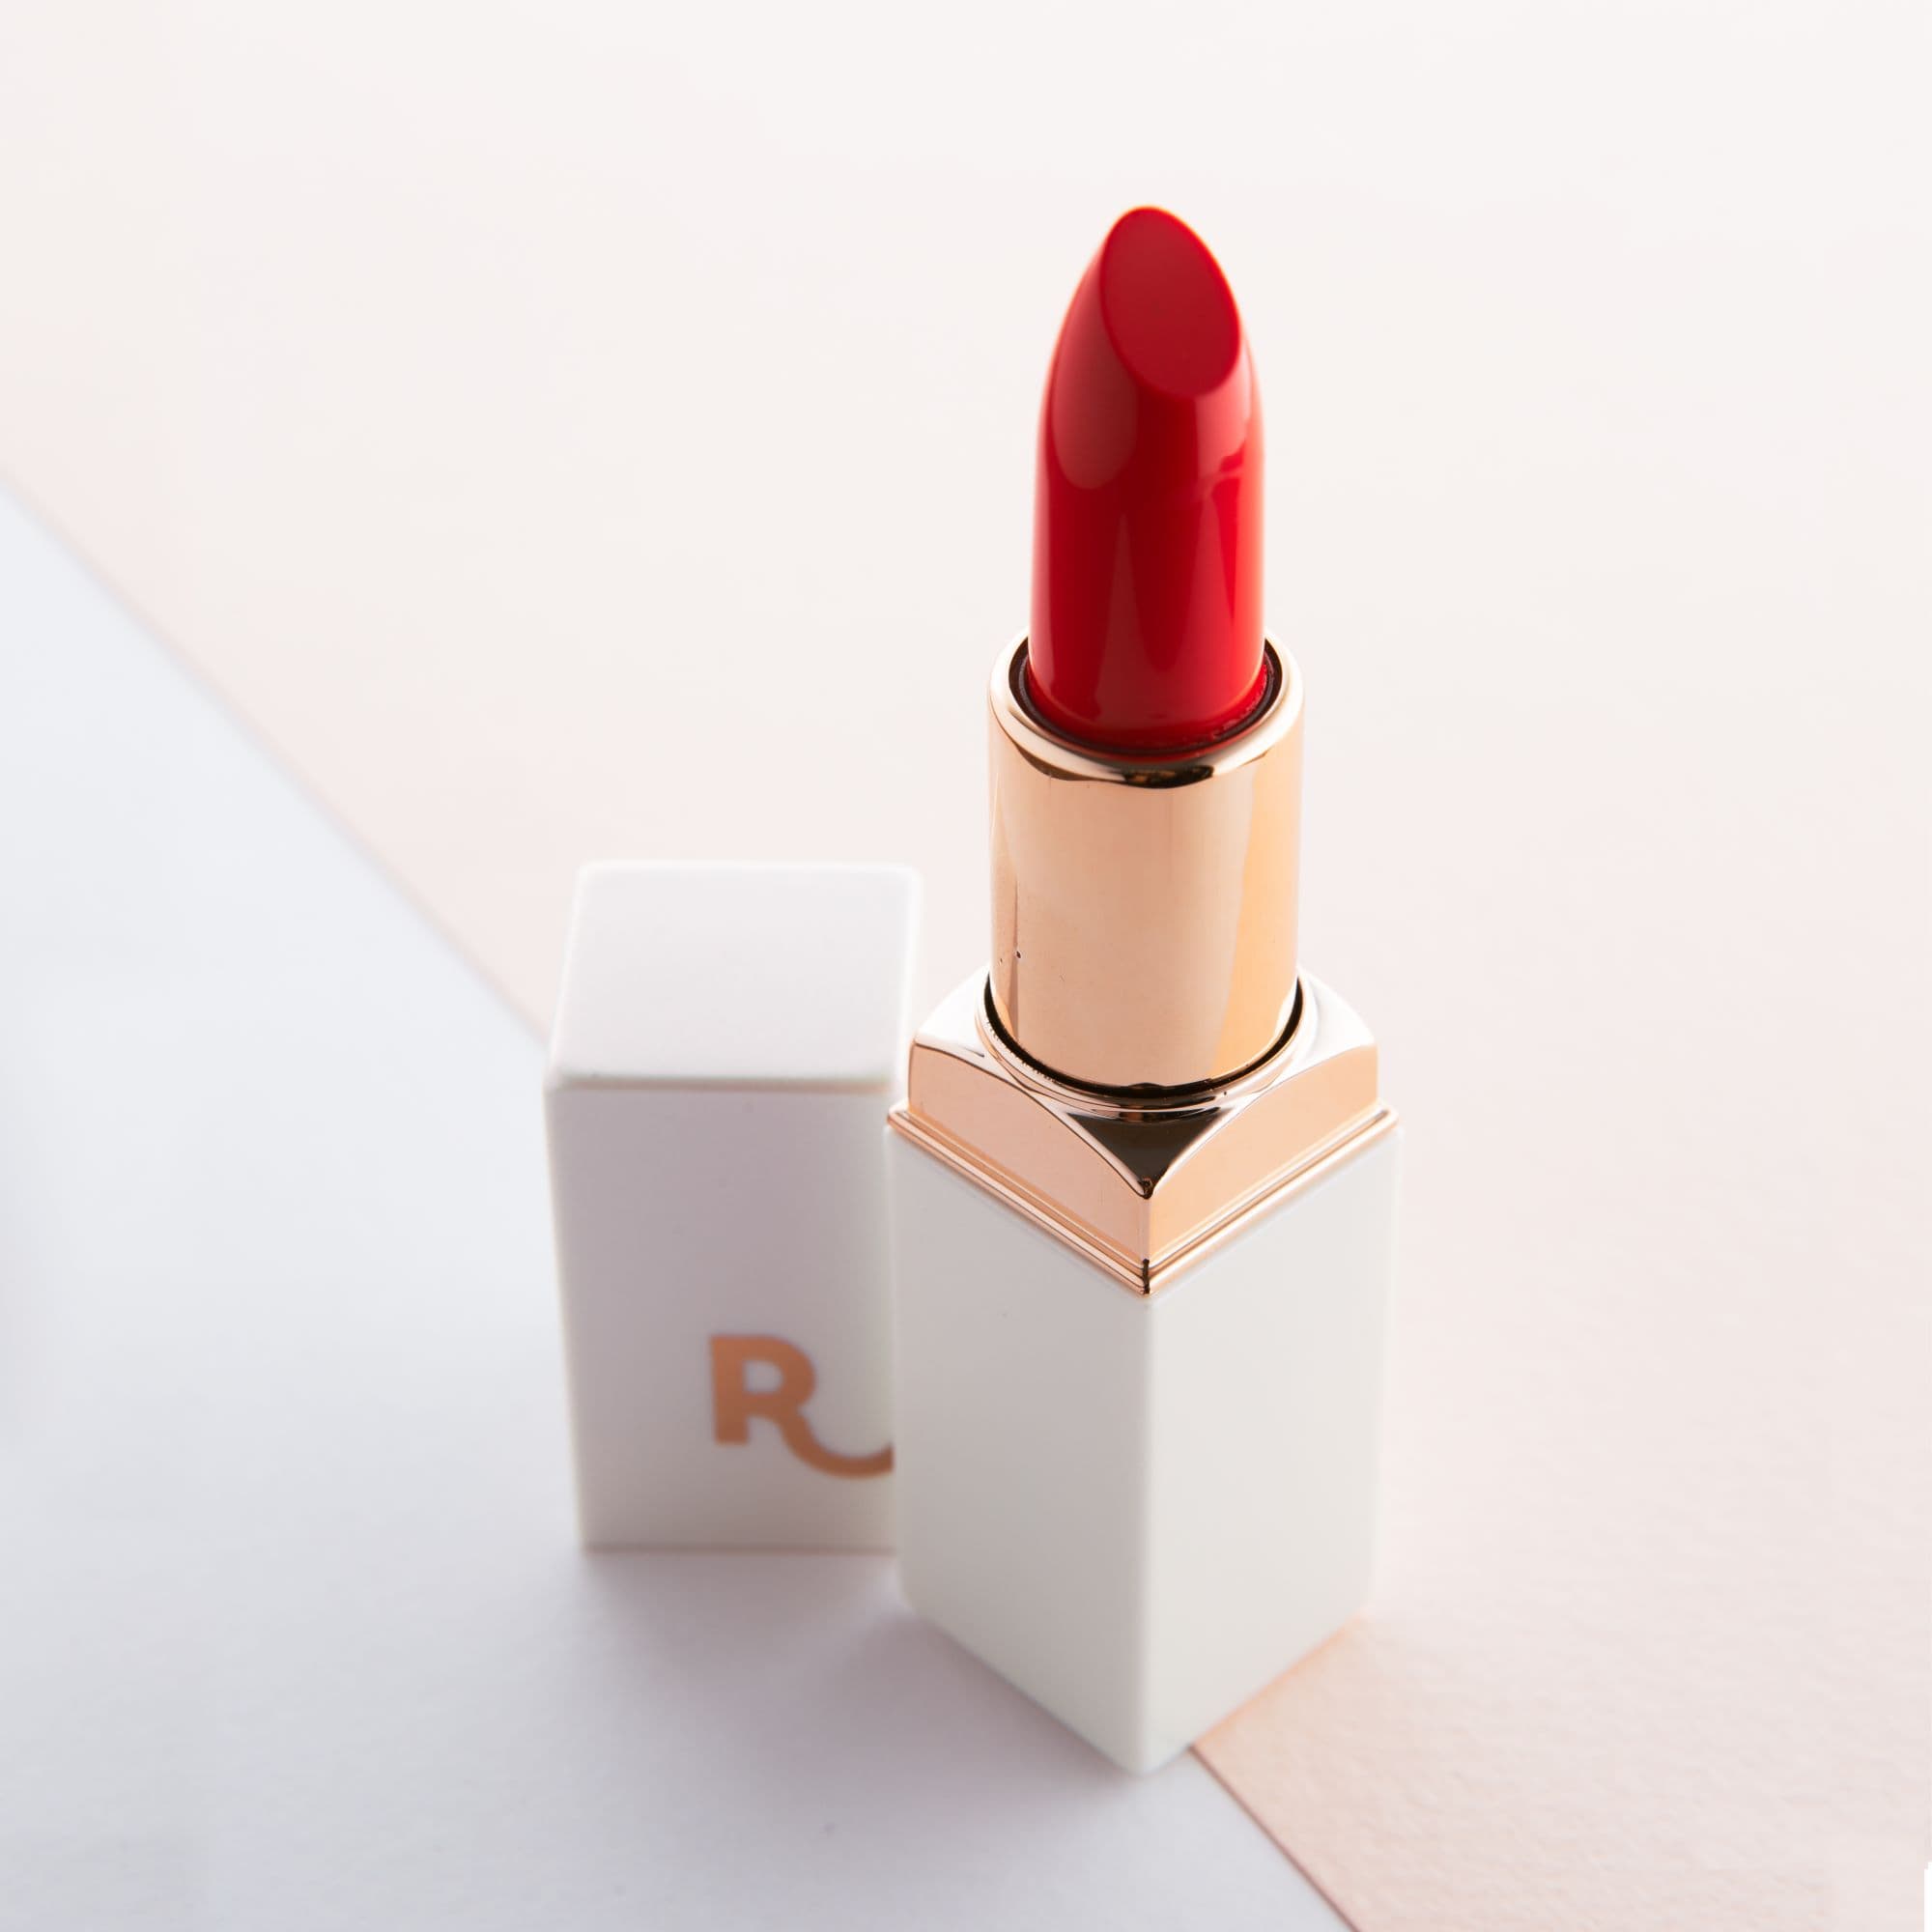 RESPARA REAL LOVE IN TINT LIPSTICK